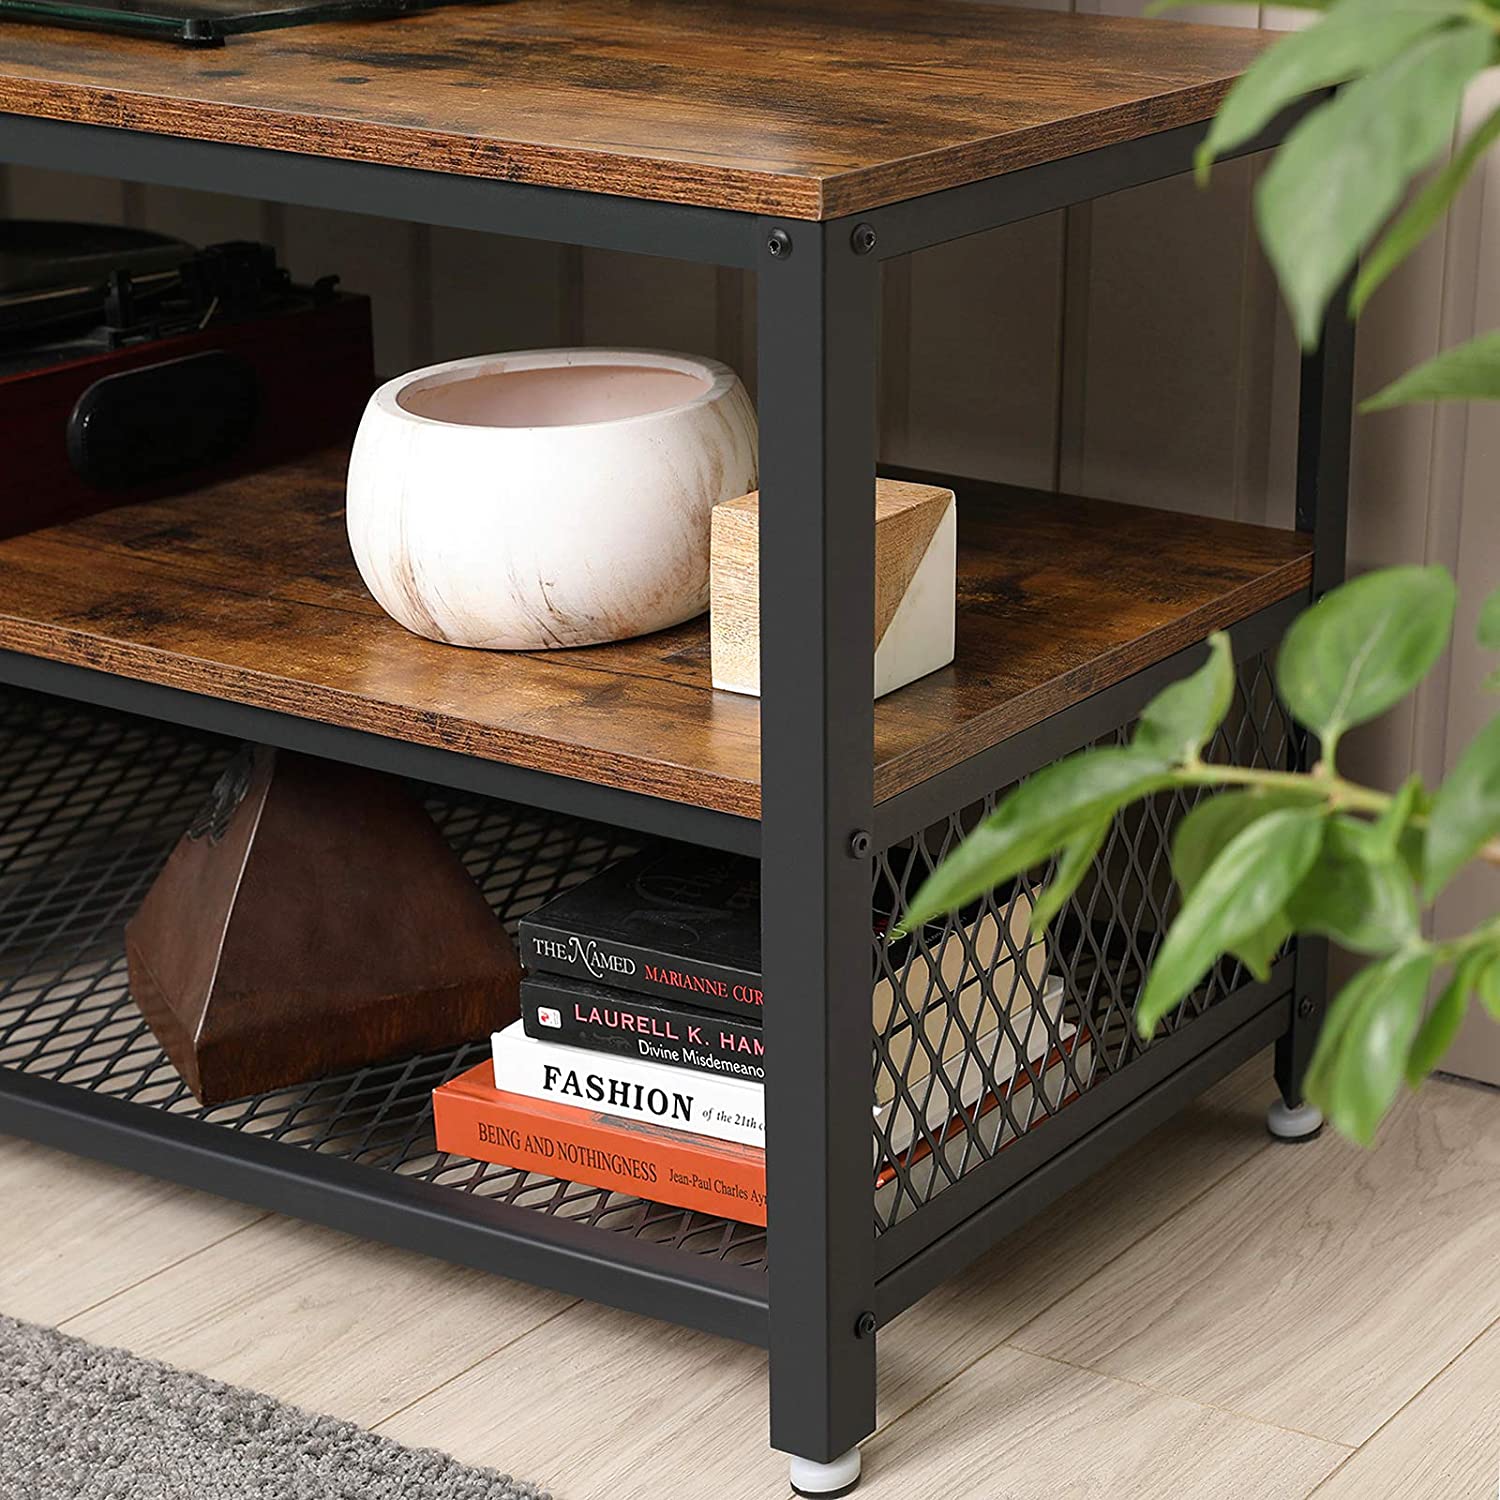 Rena Large TV Stand Industrial Style